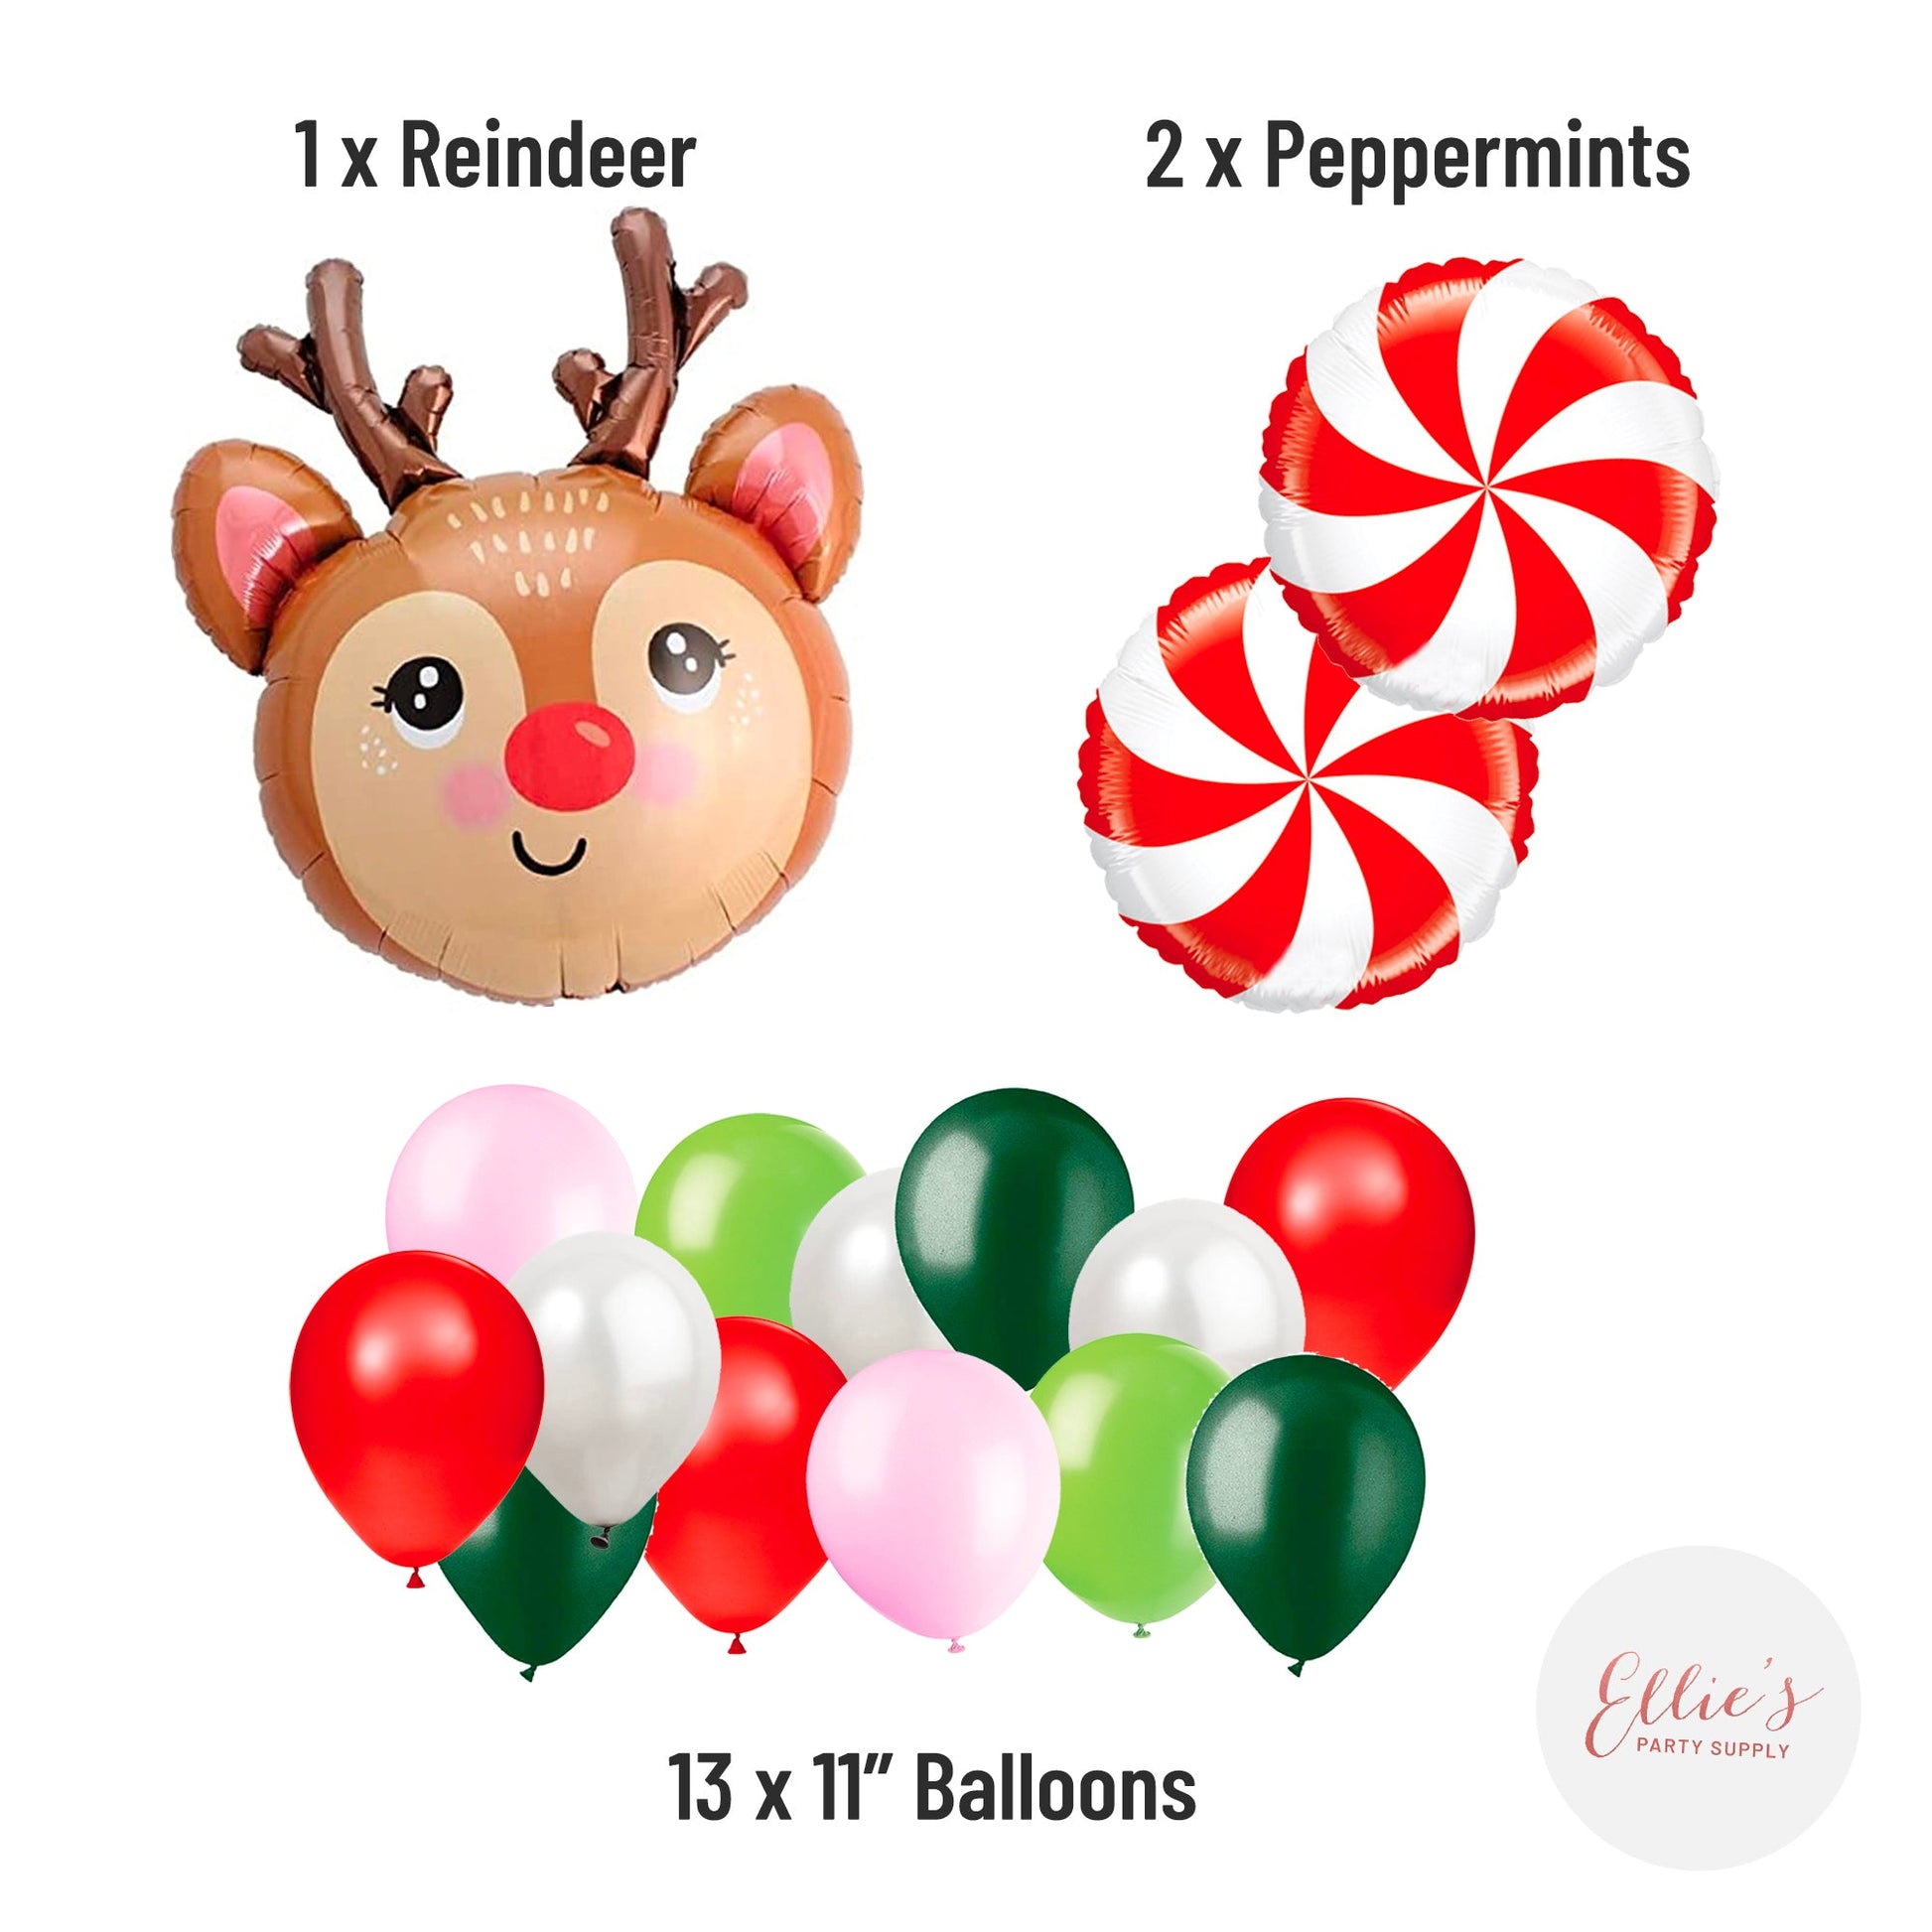 Reindeer Balloon Bouquet Kit from Ellie's Party Supply